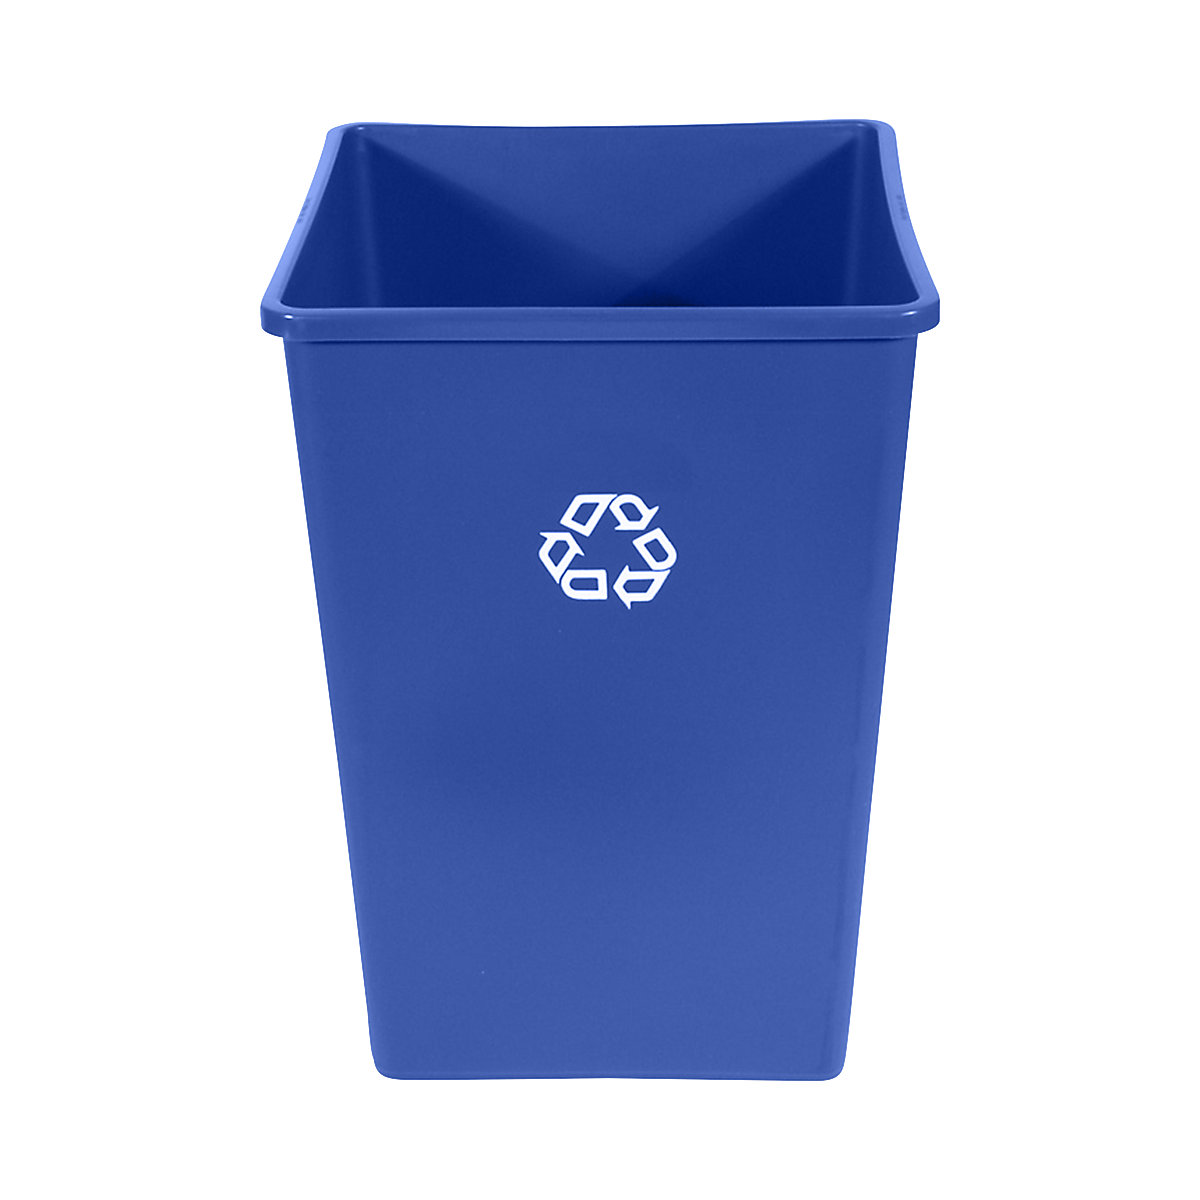 UNTOUCHABLE® recyclable waste container – Rubbermaid